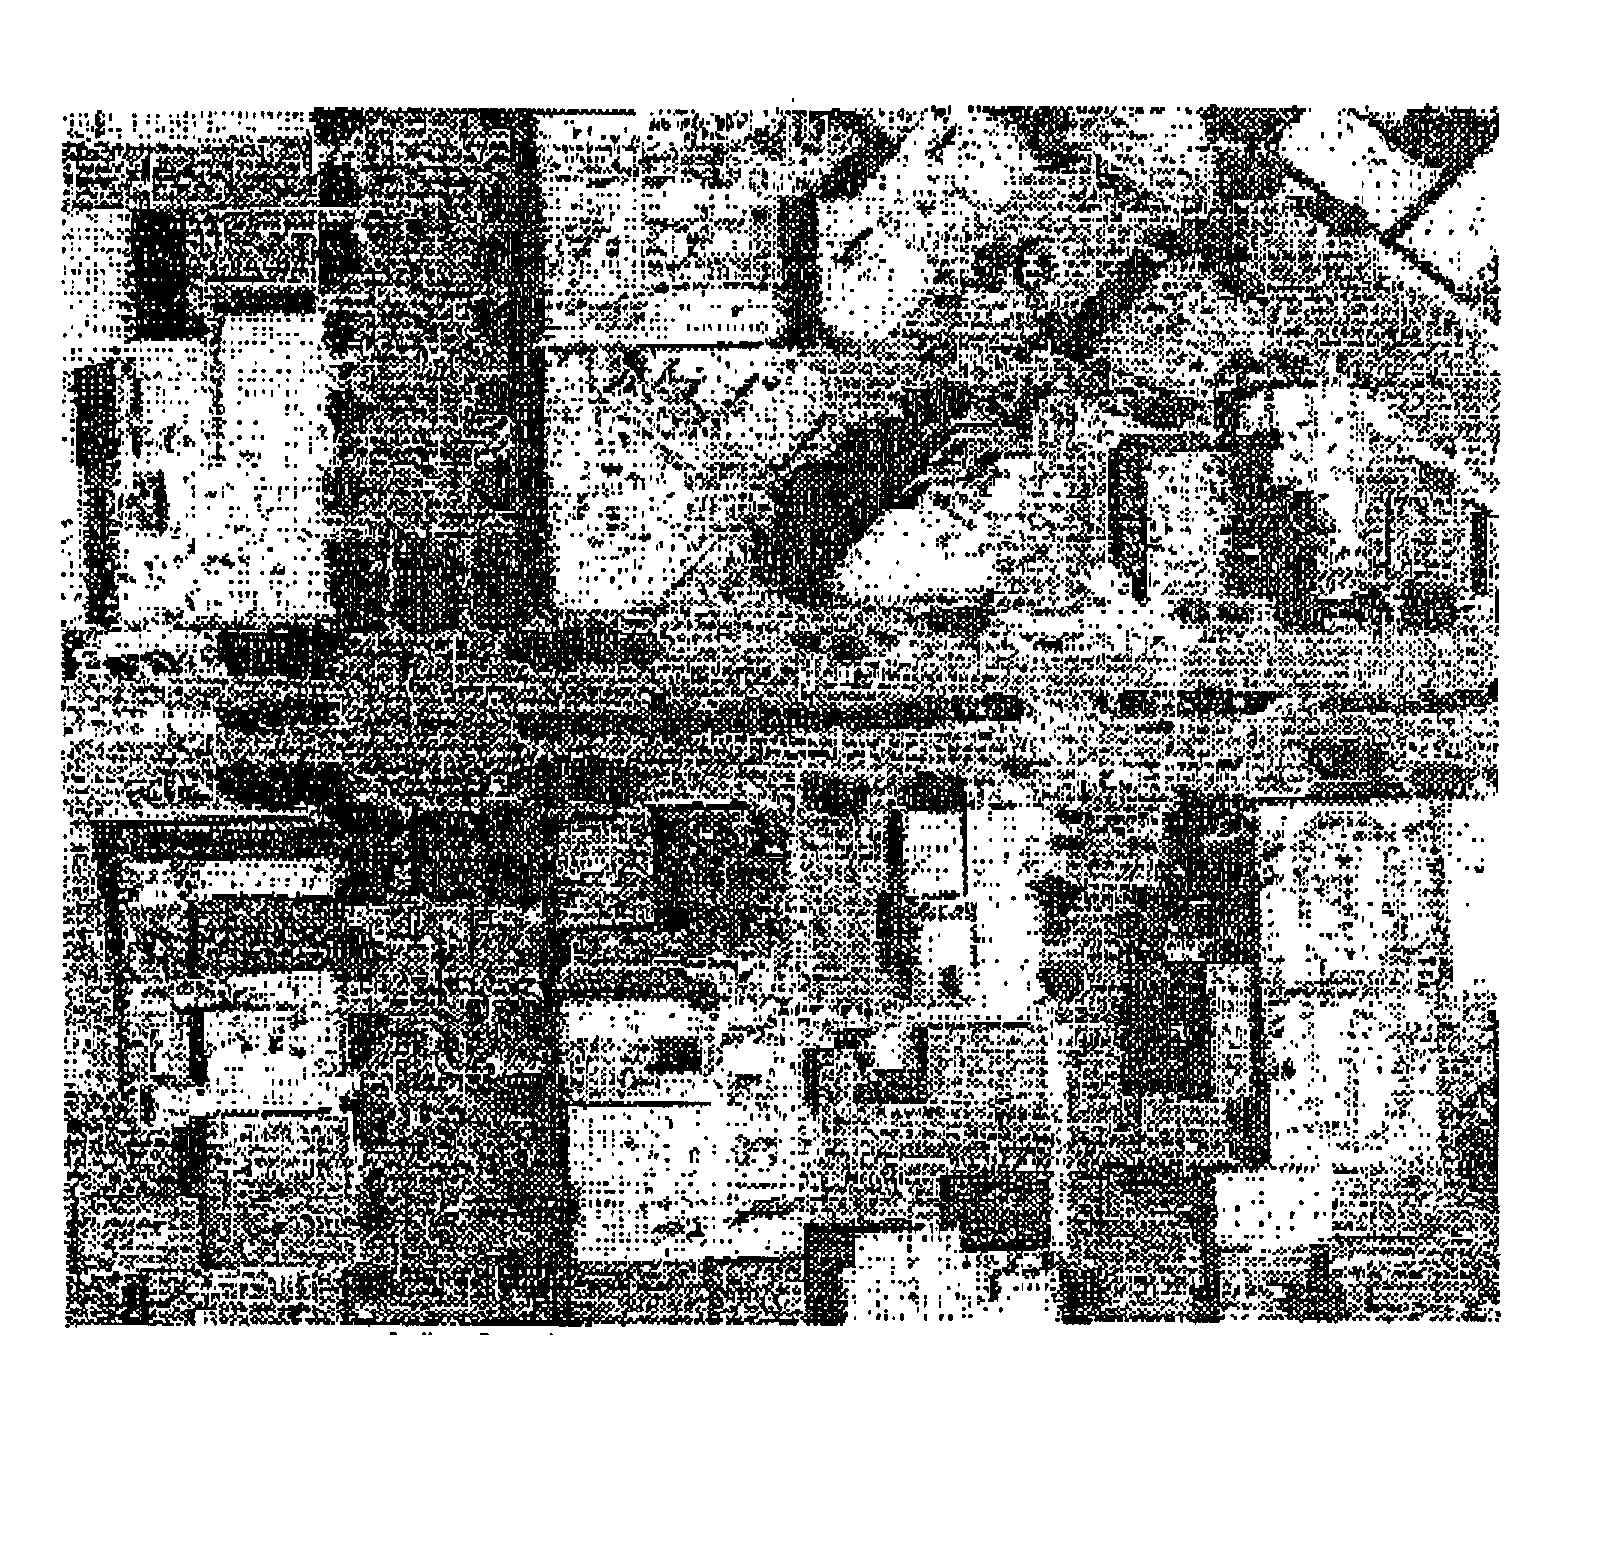 Method and system for modeling and managing terrain, buildings, and infrastructure